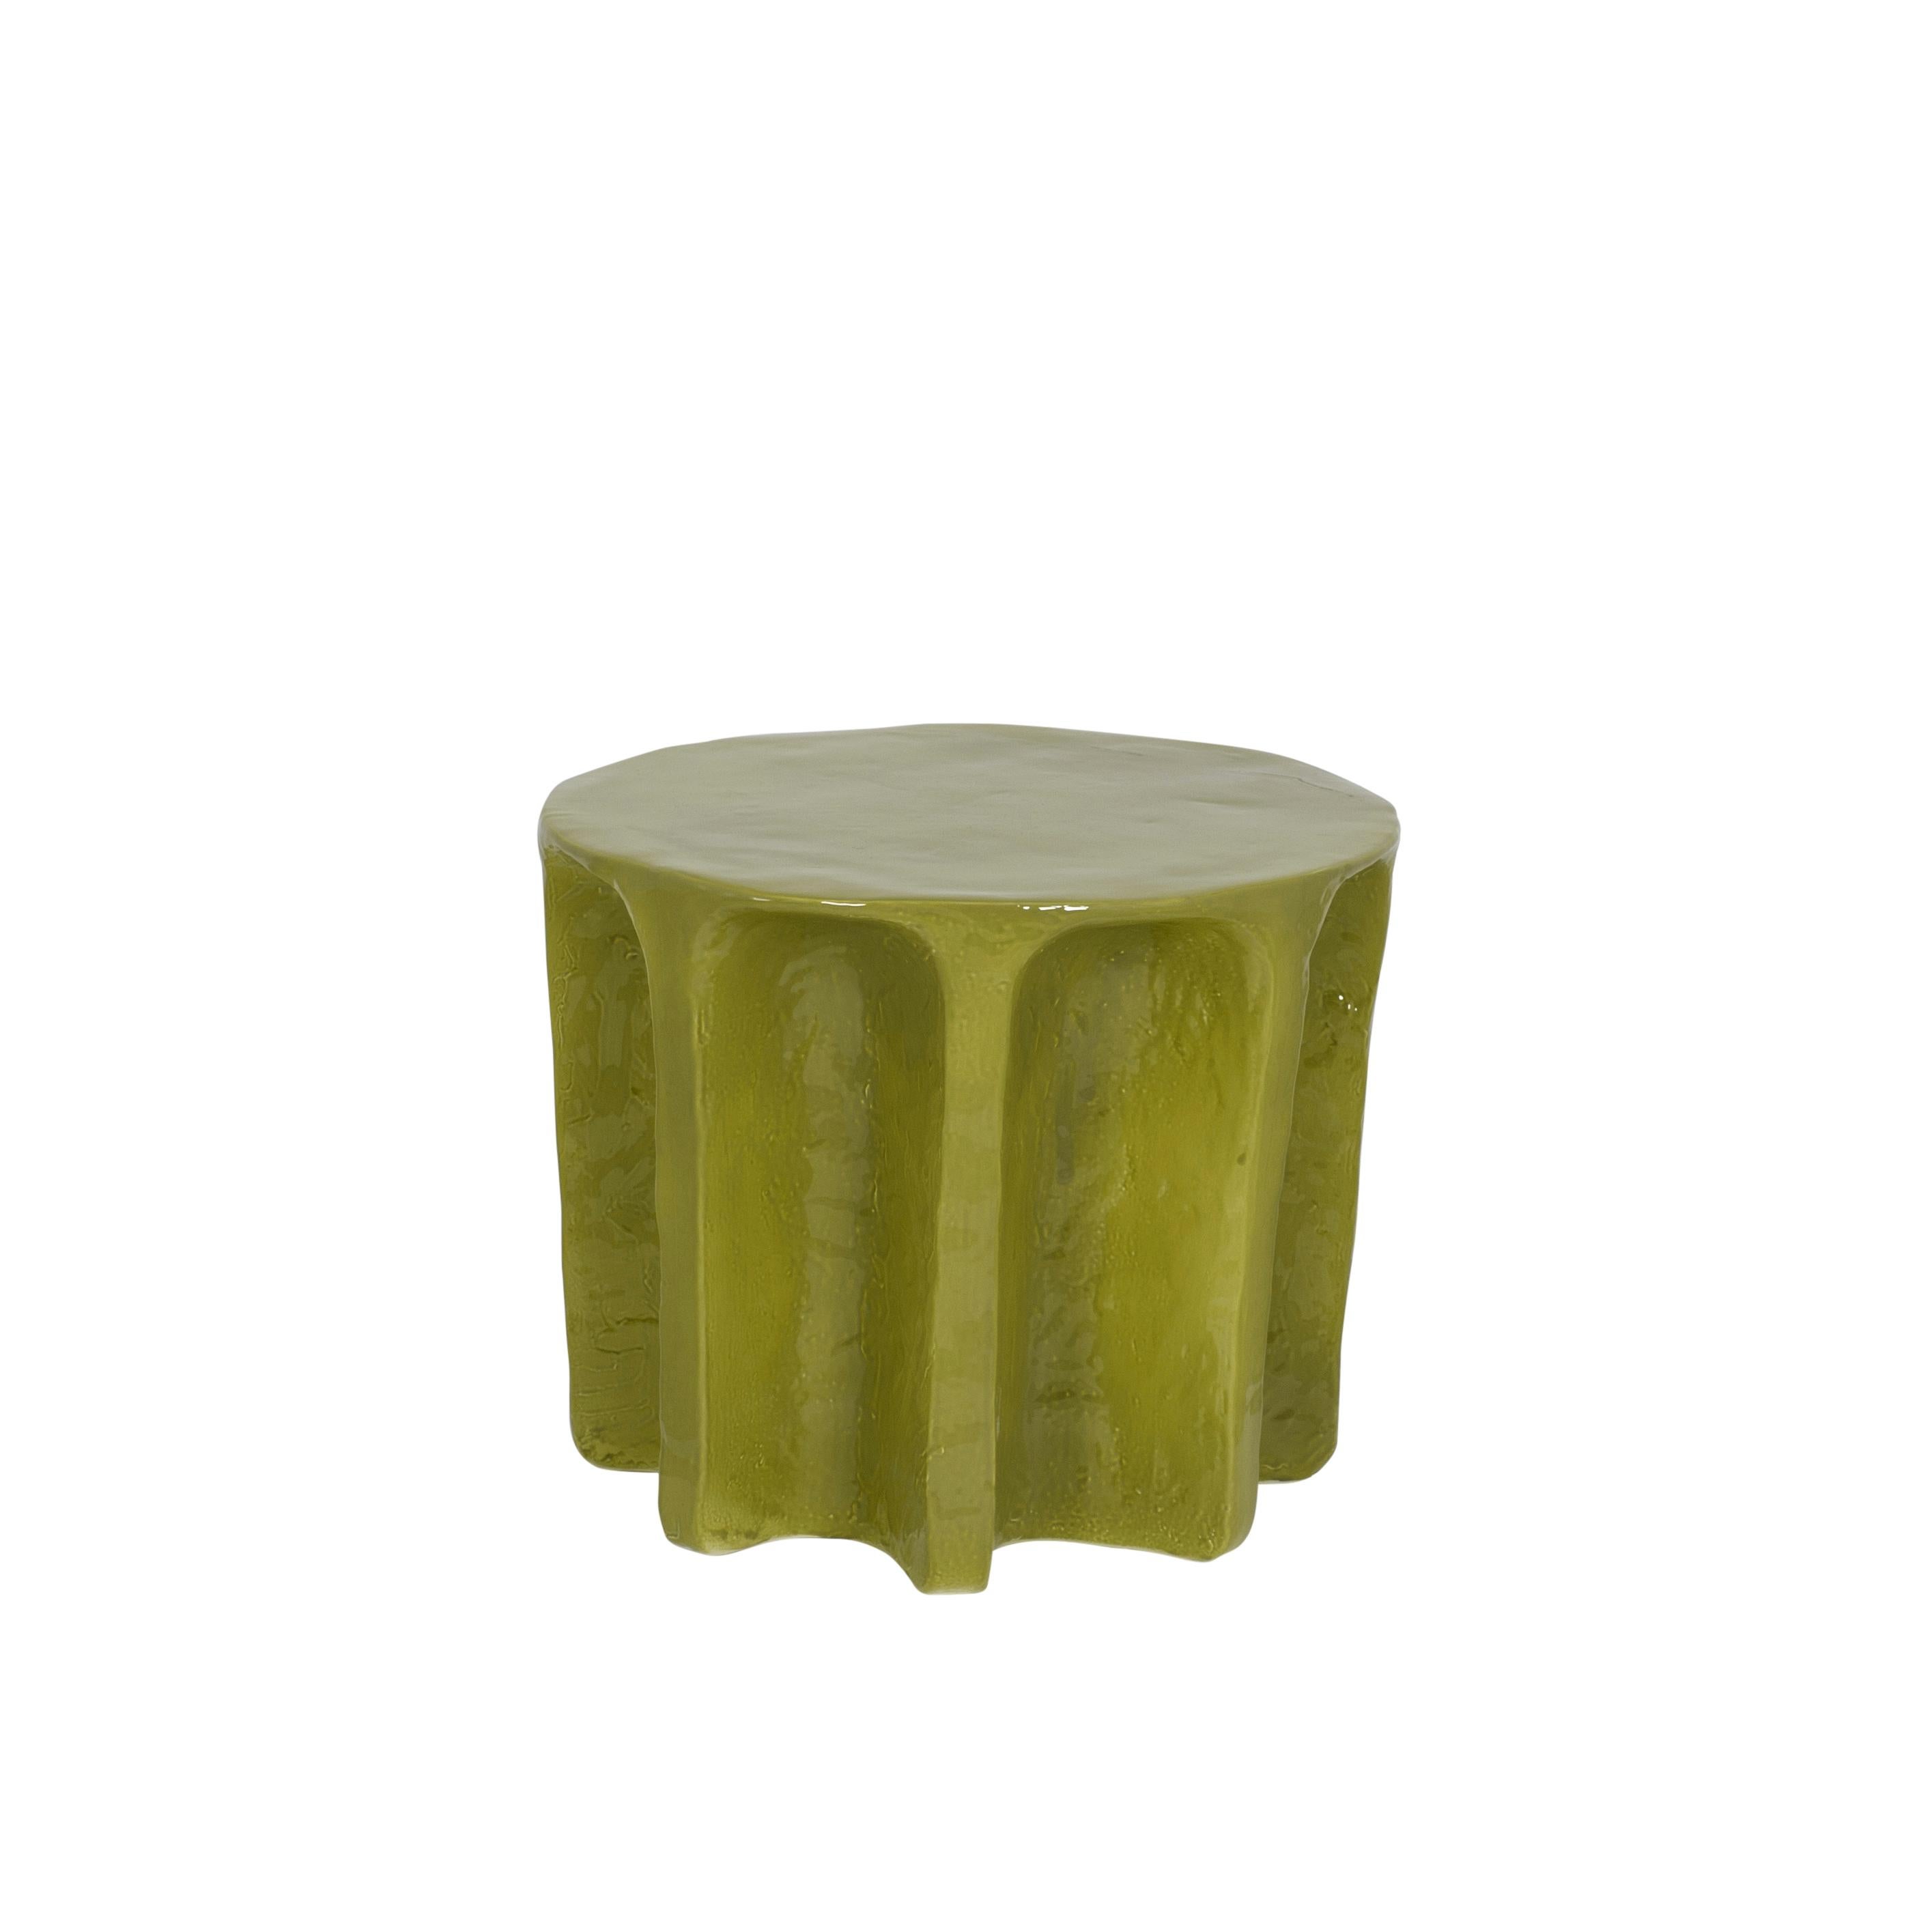 Chouchou round green coffee table by Pulpo
Dimensions: D55 x H45 cm
Materials: Ceramic.

Also available in different Colours.

Chouchou bears the contours of an antique column – which, knowing designer Lorenzo Zanovello’s, is most likely a